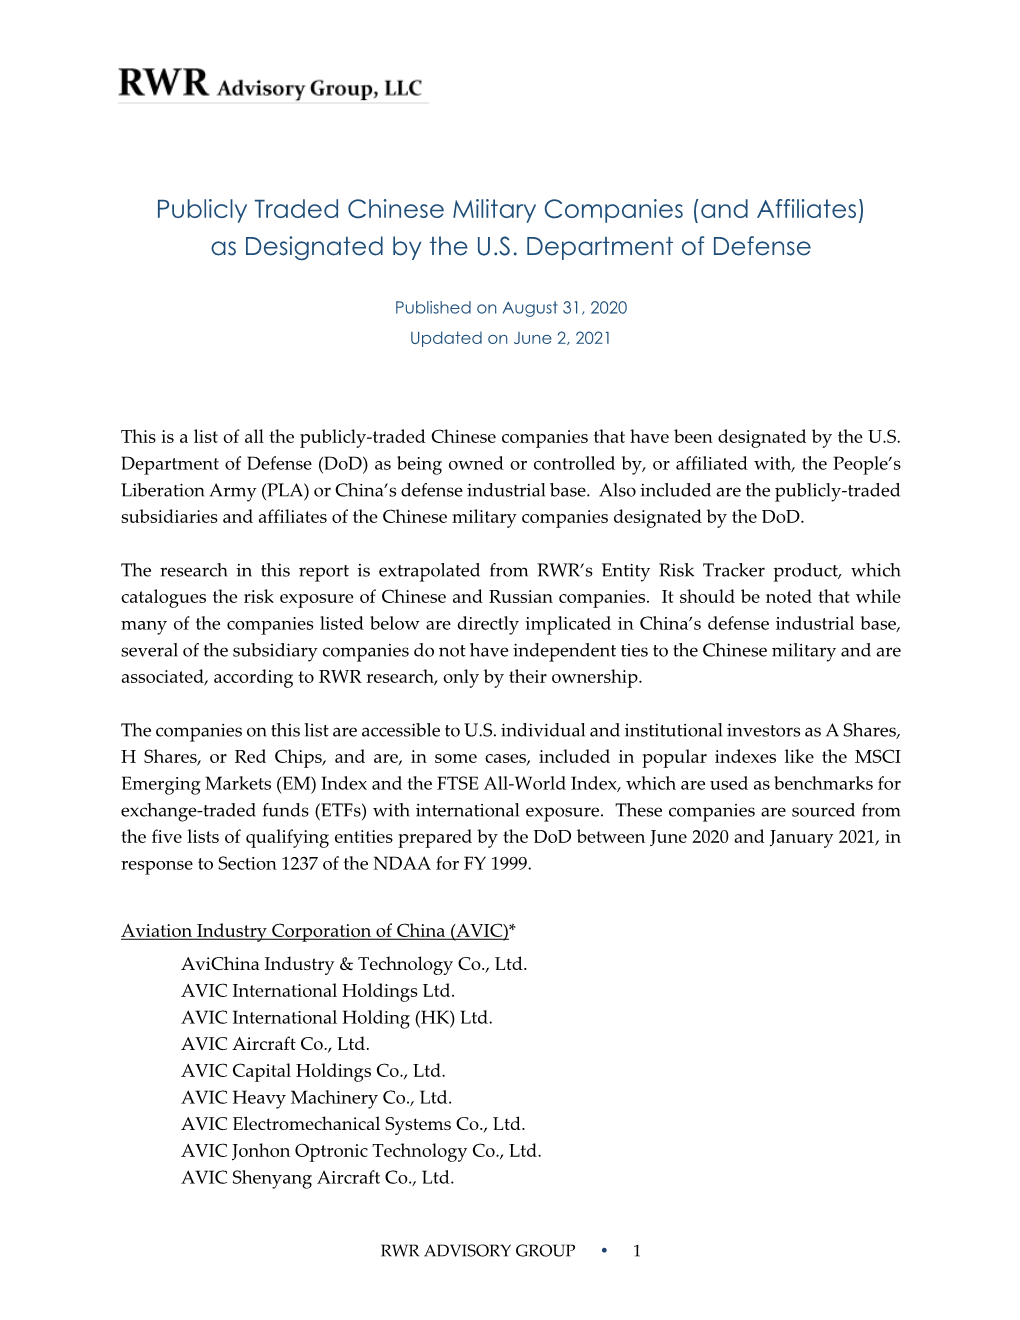 Publicly Traded Chinese Military Companies (And Affiliates) As Designated by the U.S